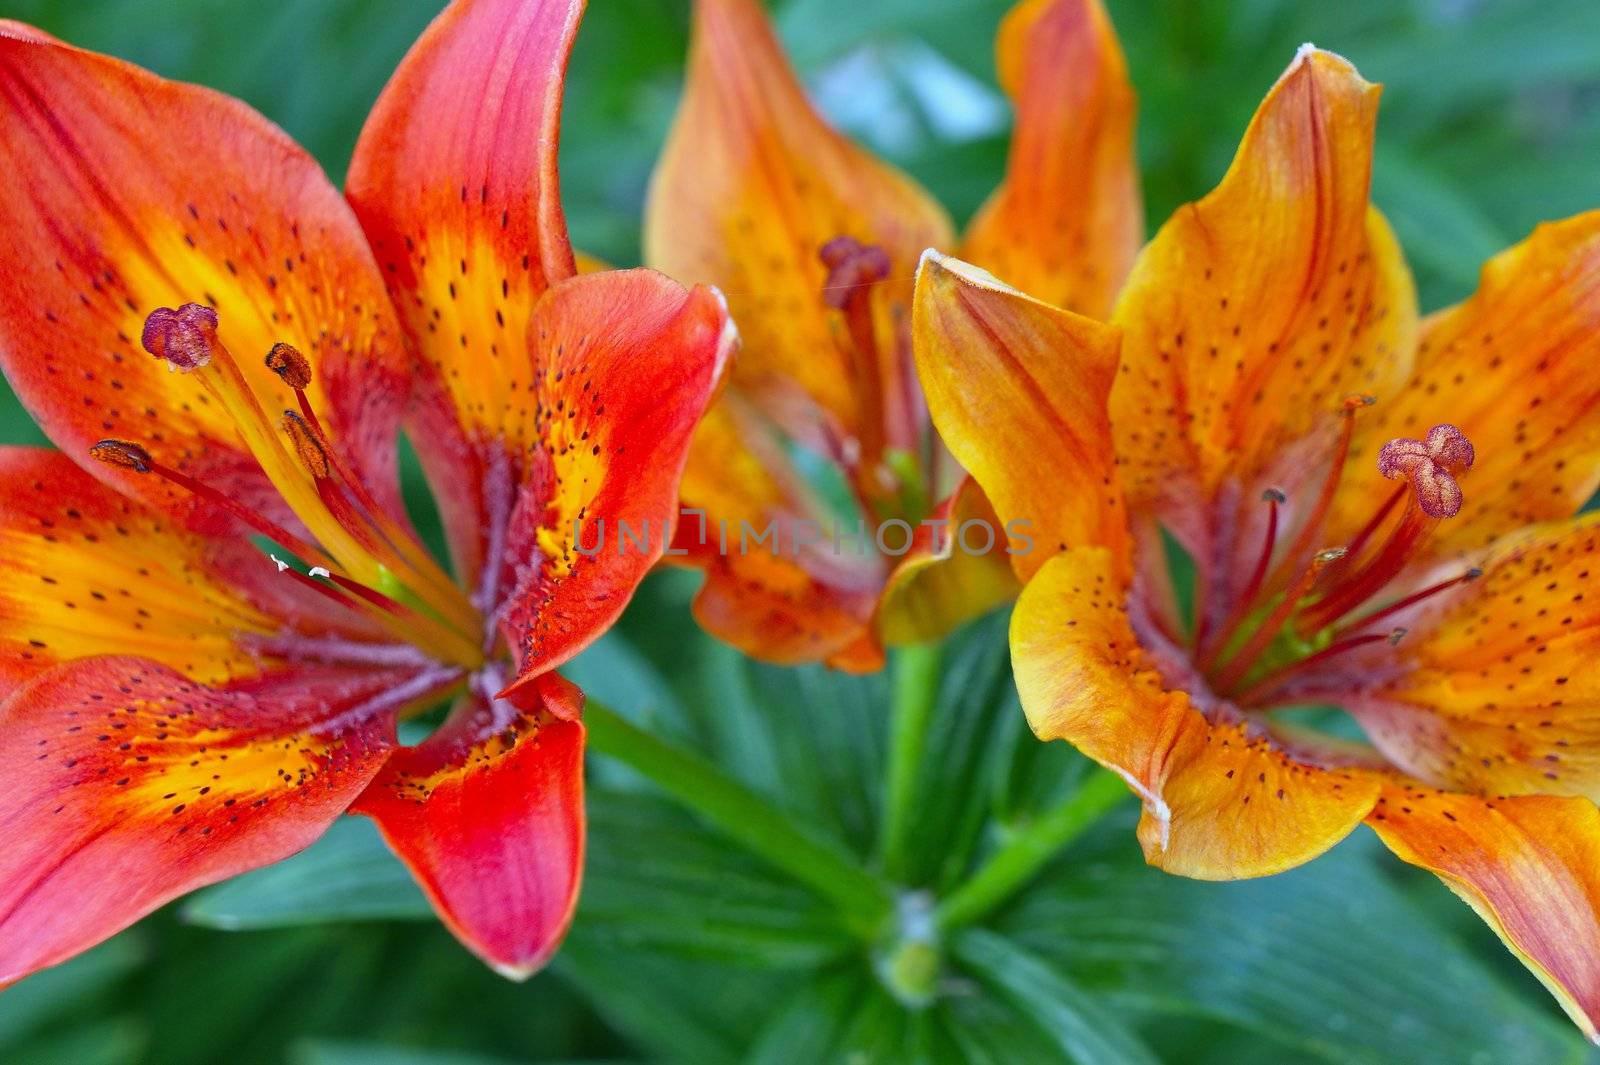 Asiatic beautiful garden tiger lilies  in natural light.